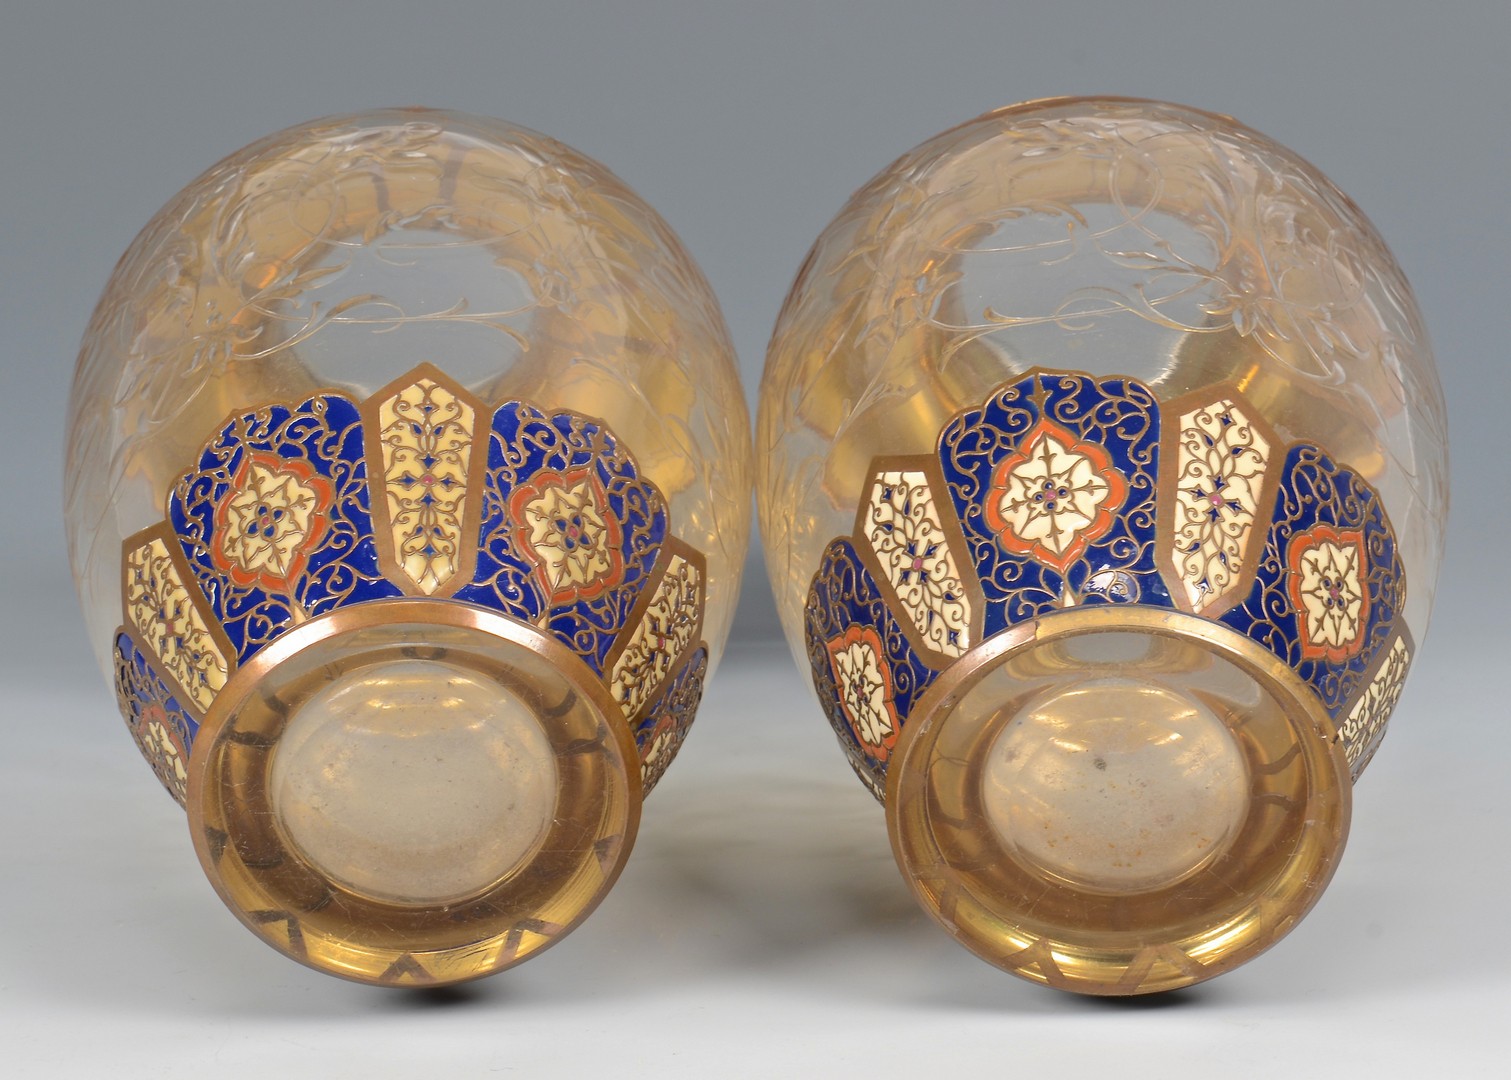 Lot 465: Enameled Glass Vases attr. Russia